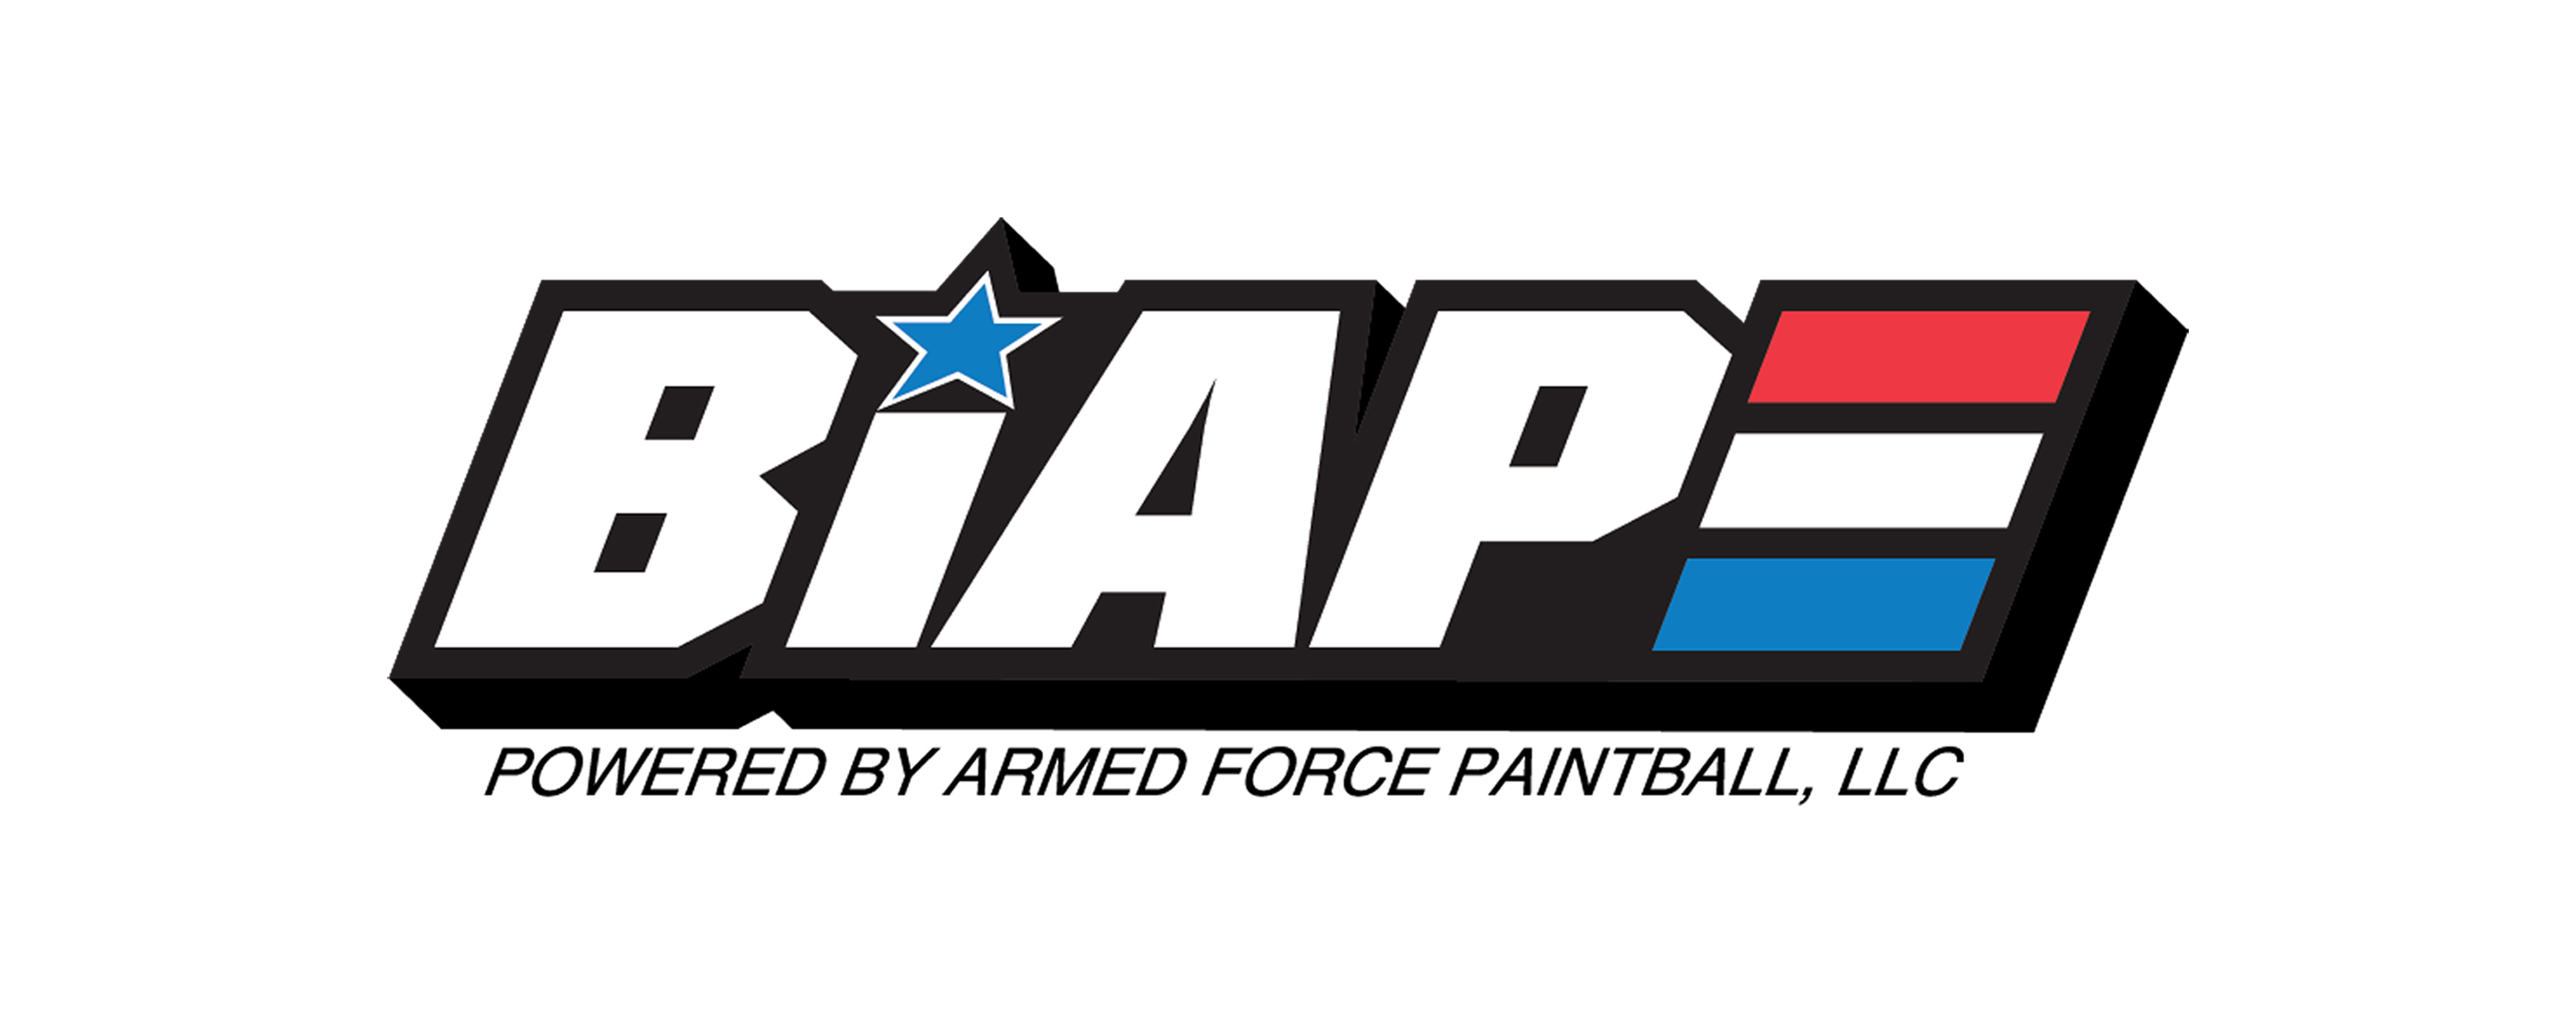 Home  Armed Force Paintball LLC